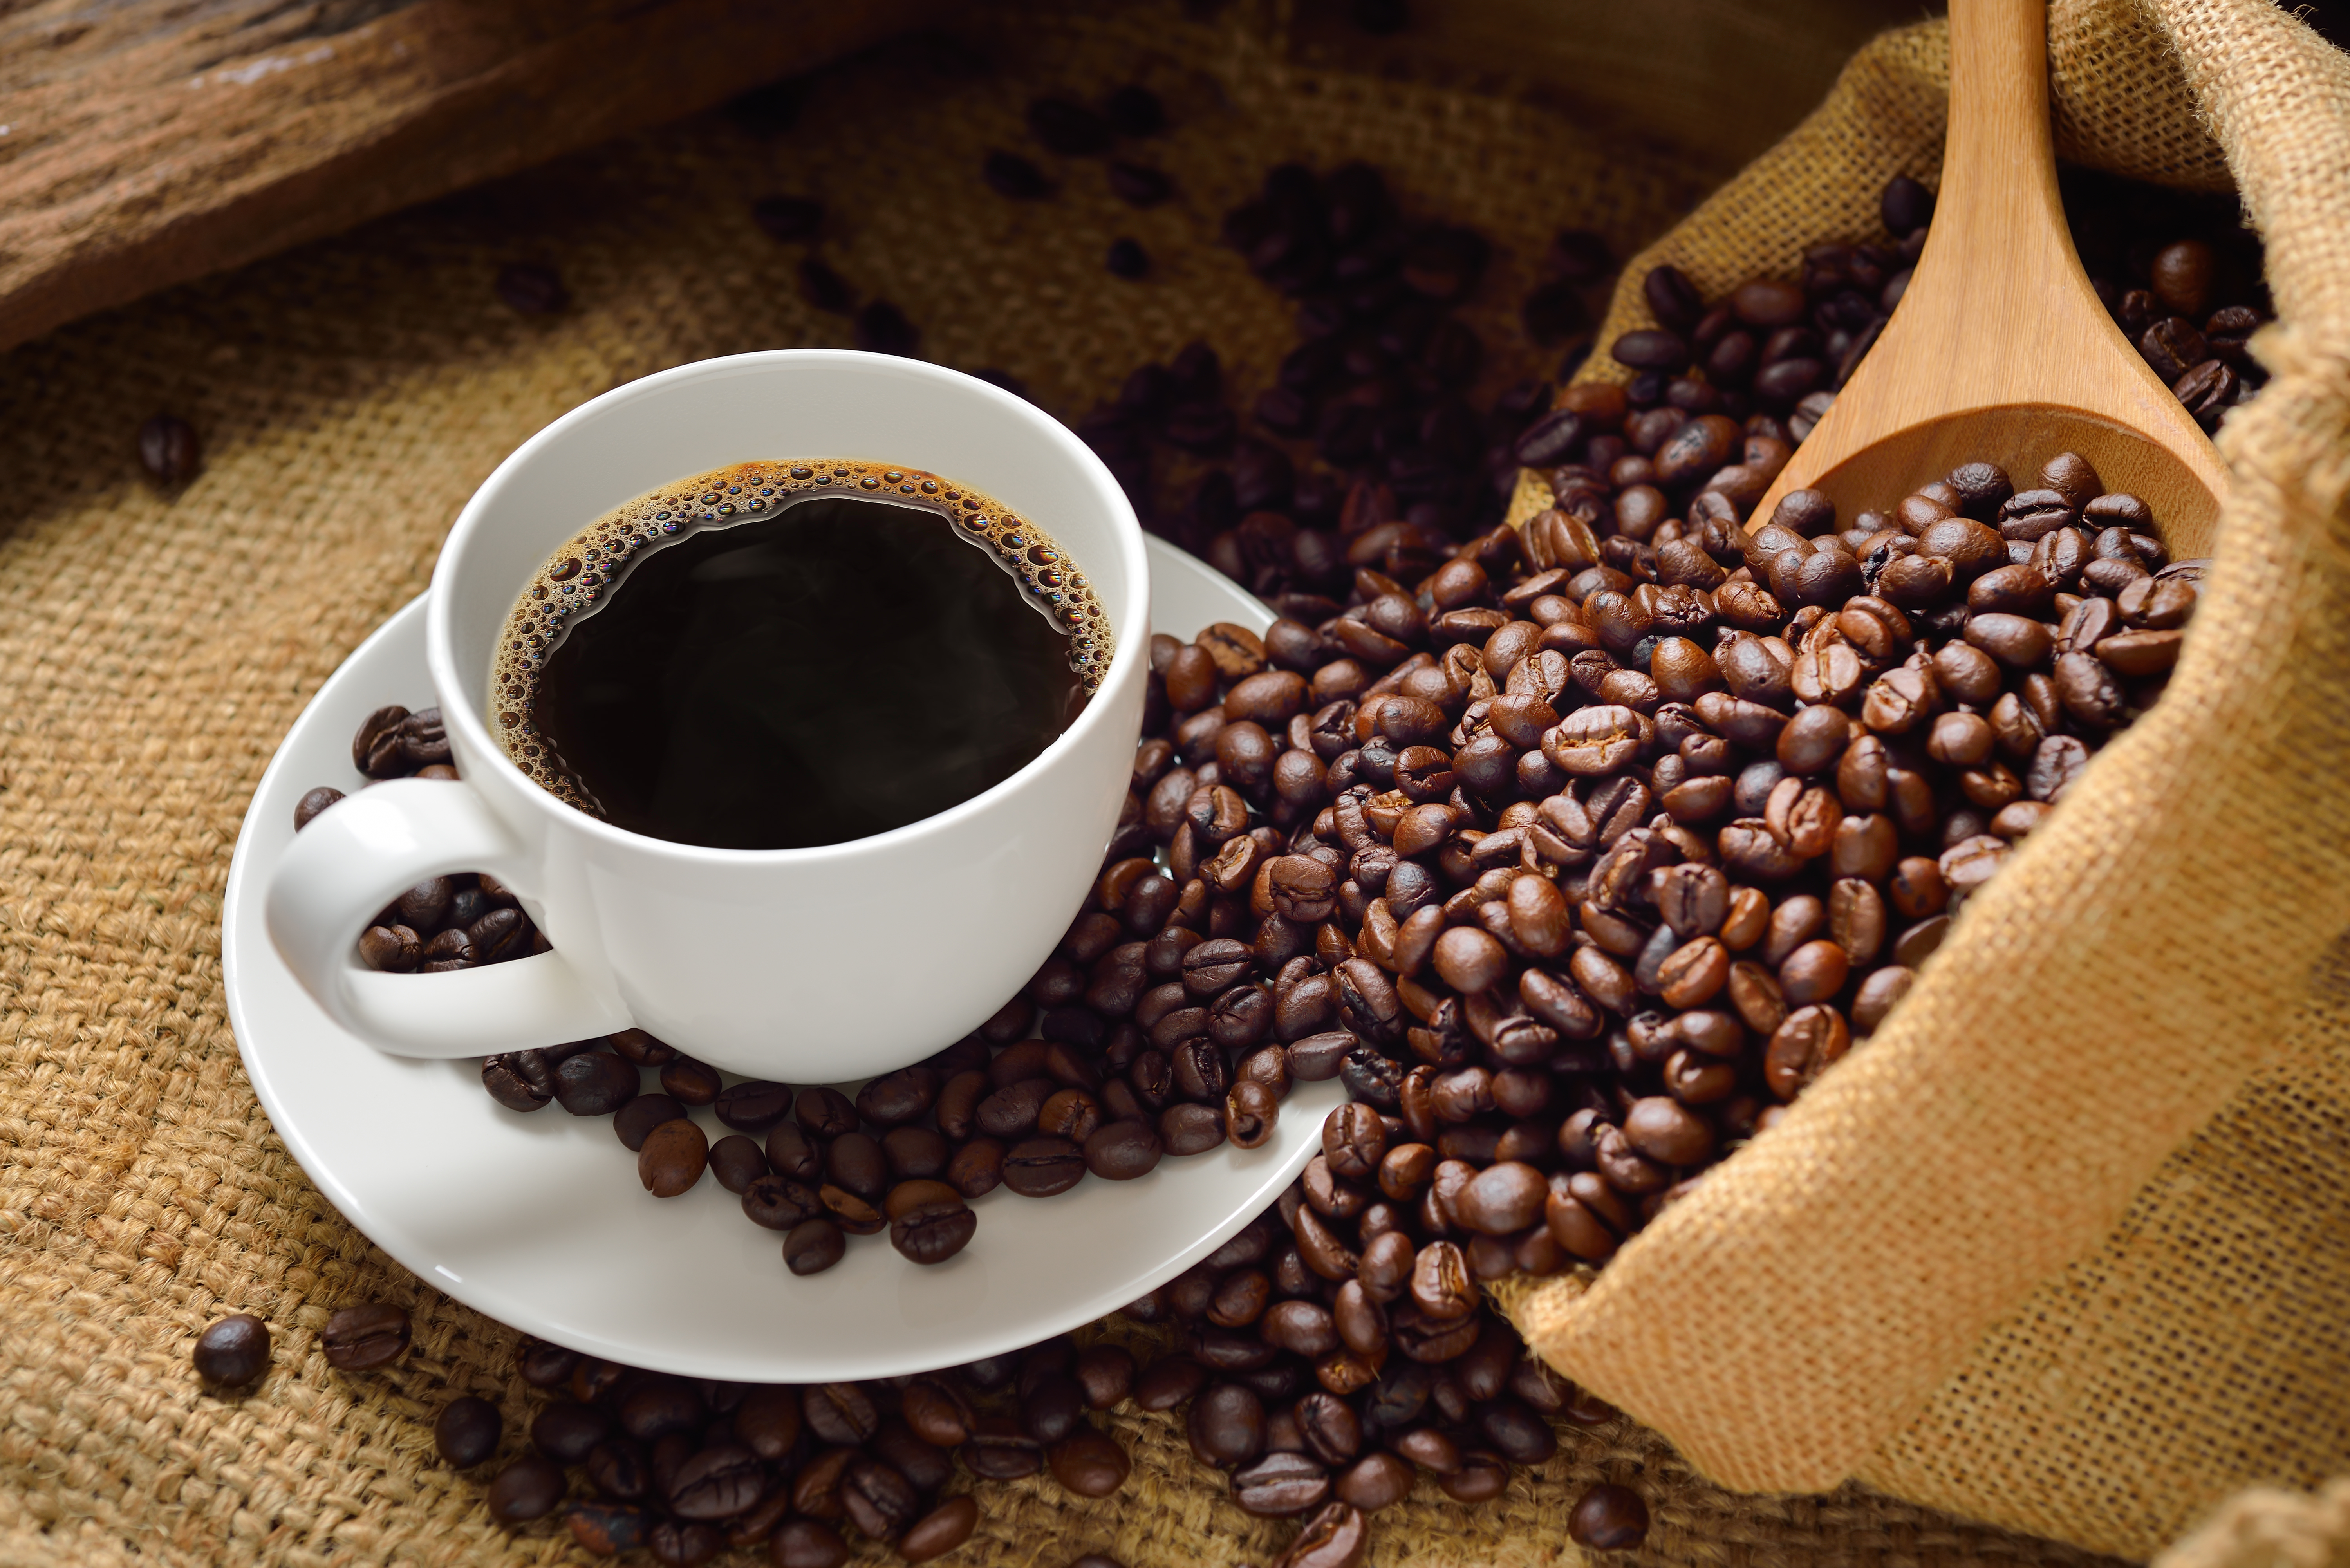 https://digitaltrades.com.au/how-to-find-the-best-wholesale-specialty-coffee-supply/